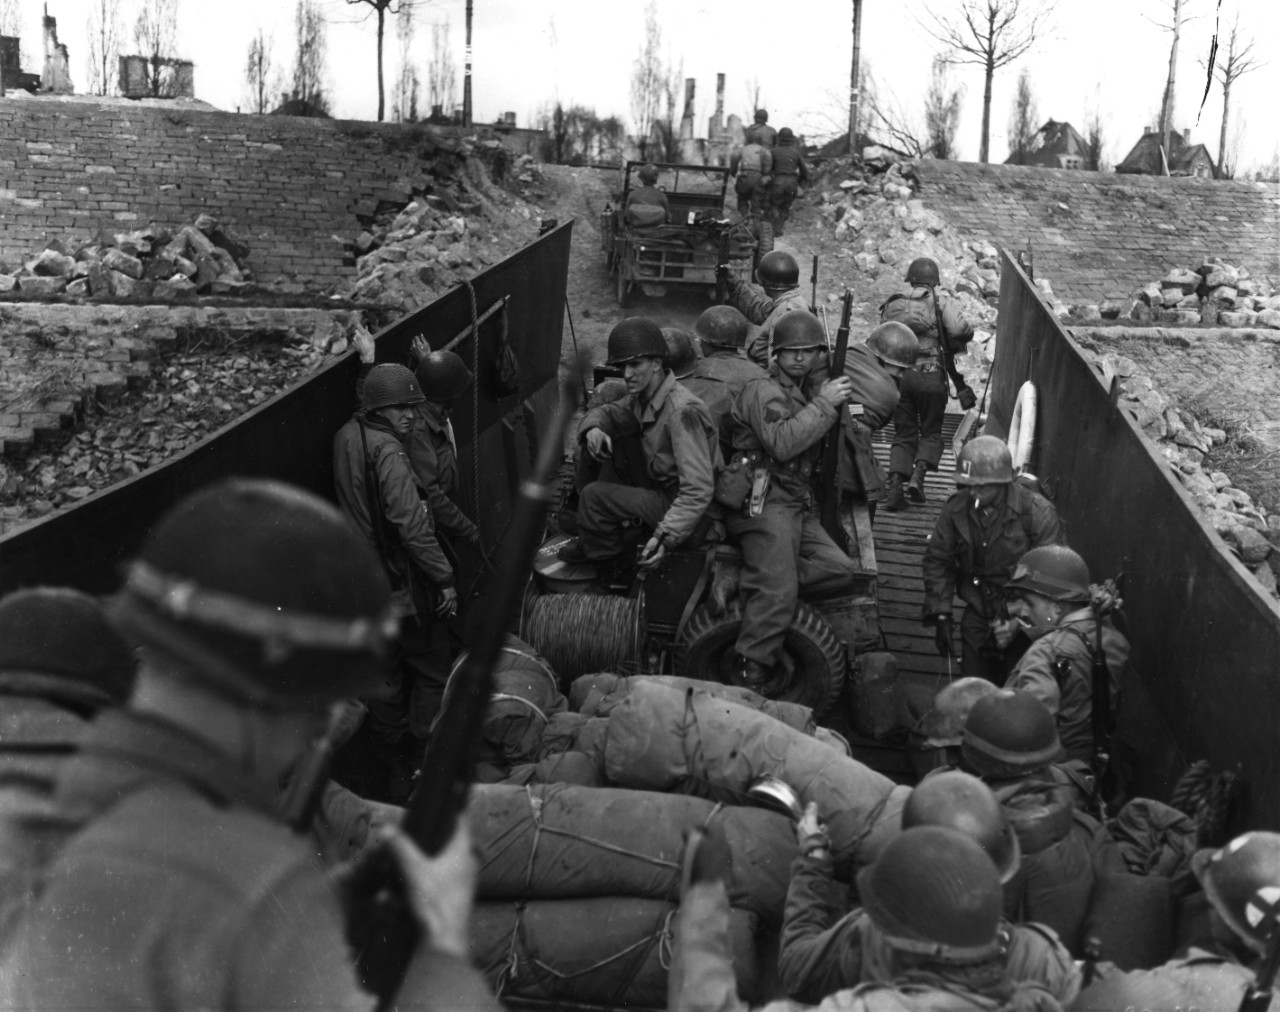 Men and vehicles of the 80th Infantry Division, Third US Army, load into a landing craft prior to crossing the Rhine River, Germany, 29 March 1945. Note M-1 Garand rifle and belt gear of man in center, including TL-29 knife, and M-1 carbines carried by other men.